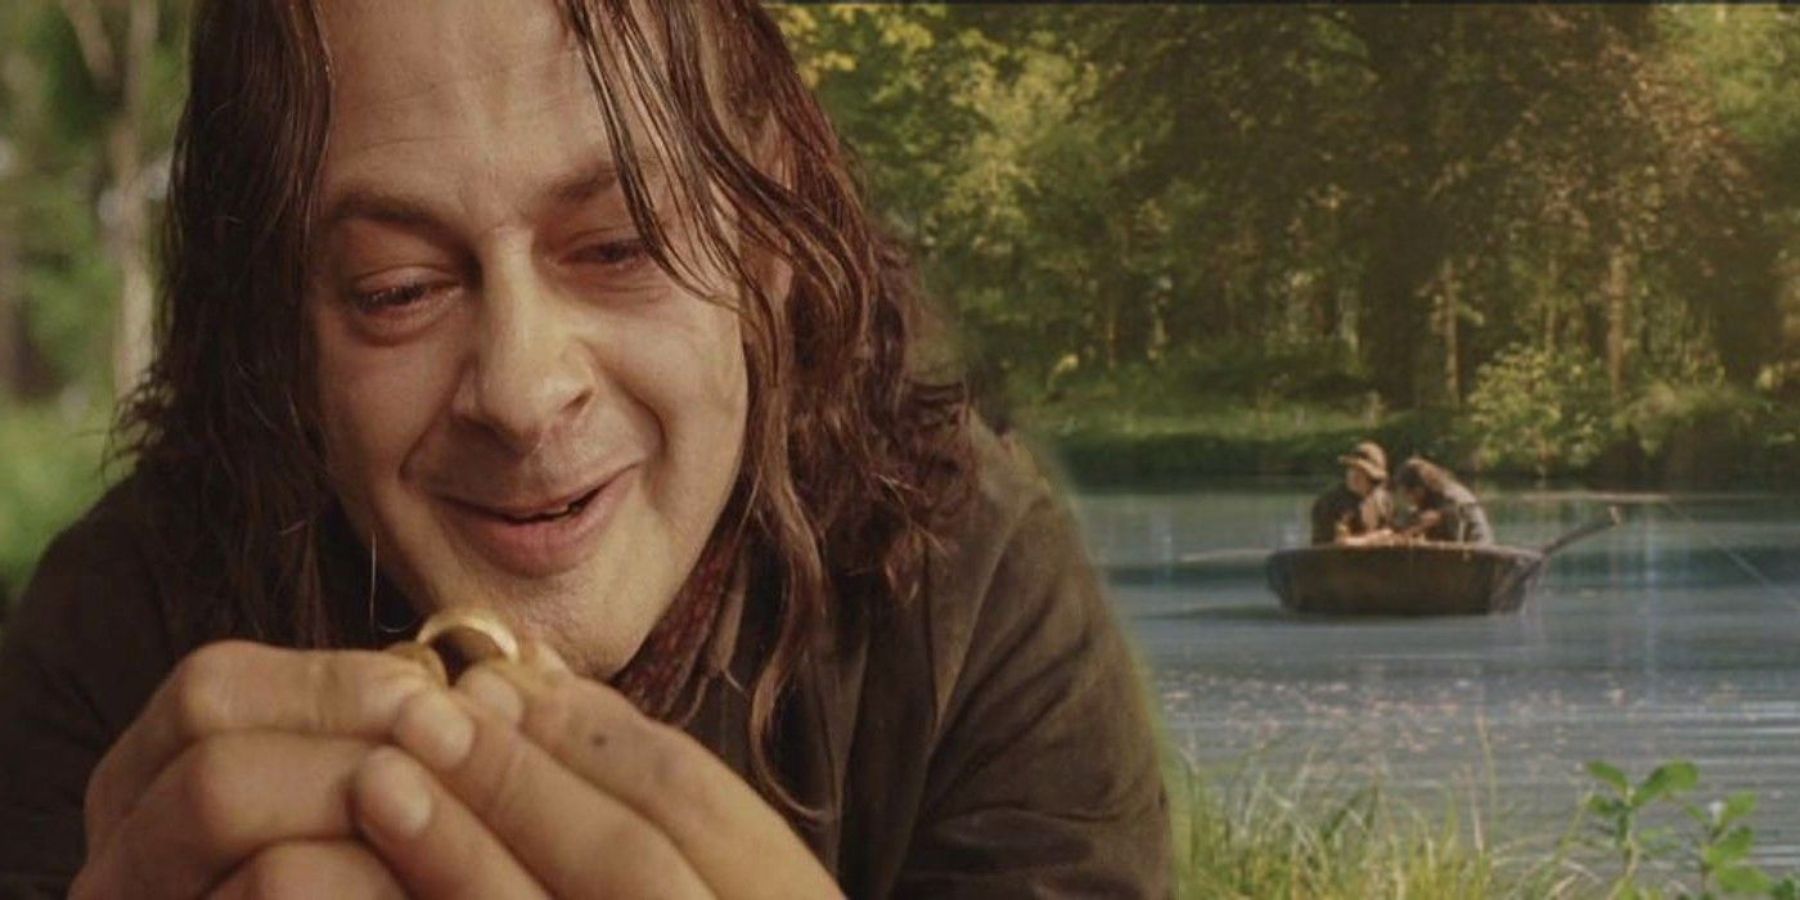 Narabar Silicium Clancy LOTR: Would Gollum Have Been Allowed To Go To The Undying Lands Because He  Was A Ringbearer?